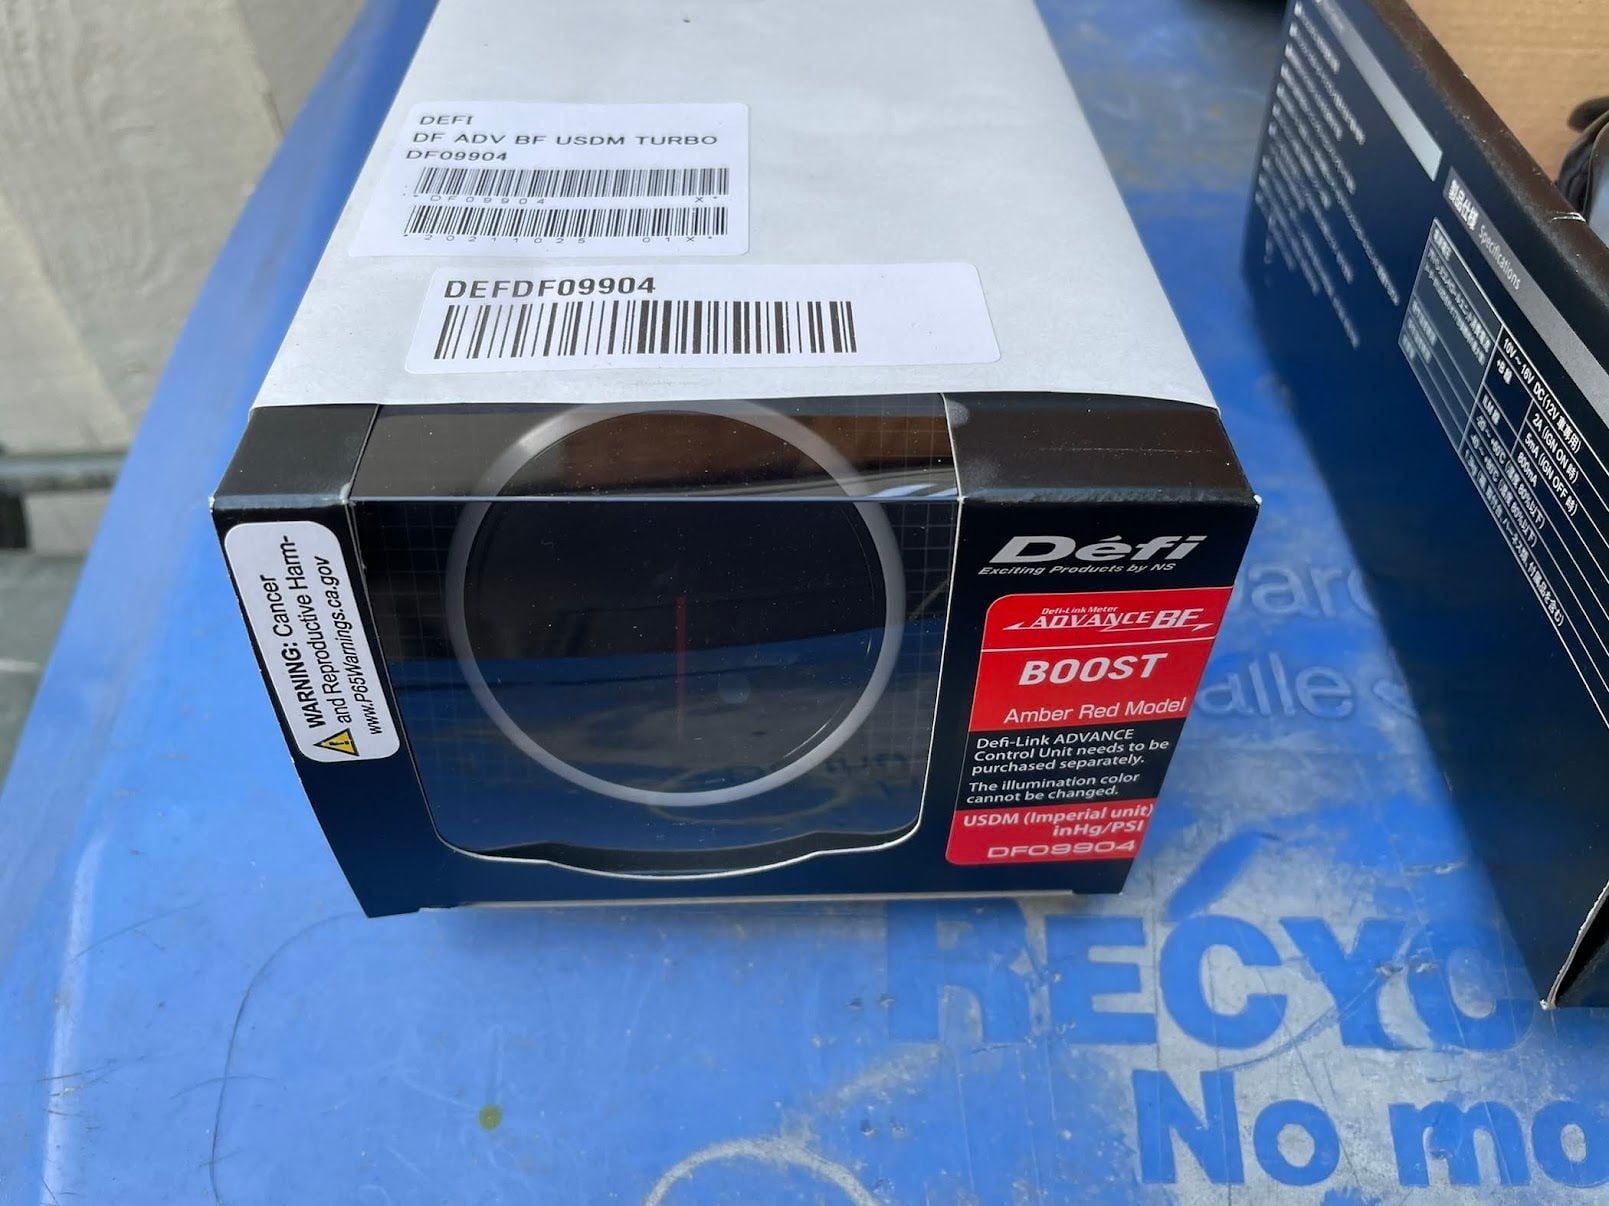 Accessories - Boost Gauge - BNIB Defi BF Advance 60mm Imperial Units Red/Amber - New - All Years Any Make All Models - San Jose, CA 95112, United States